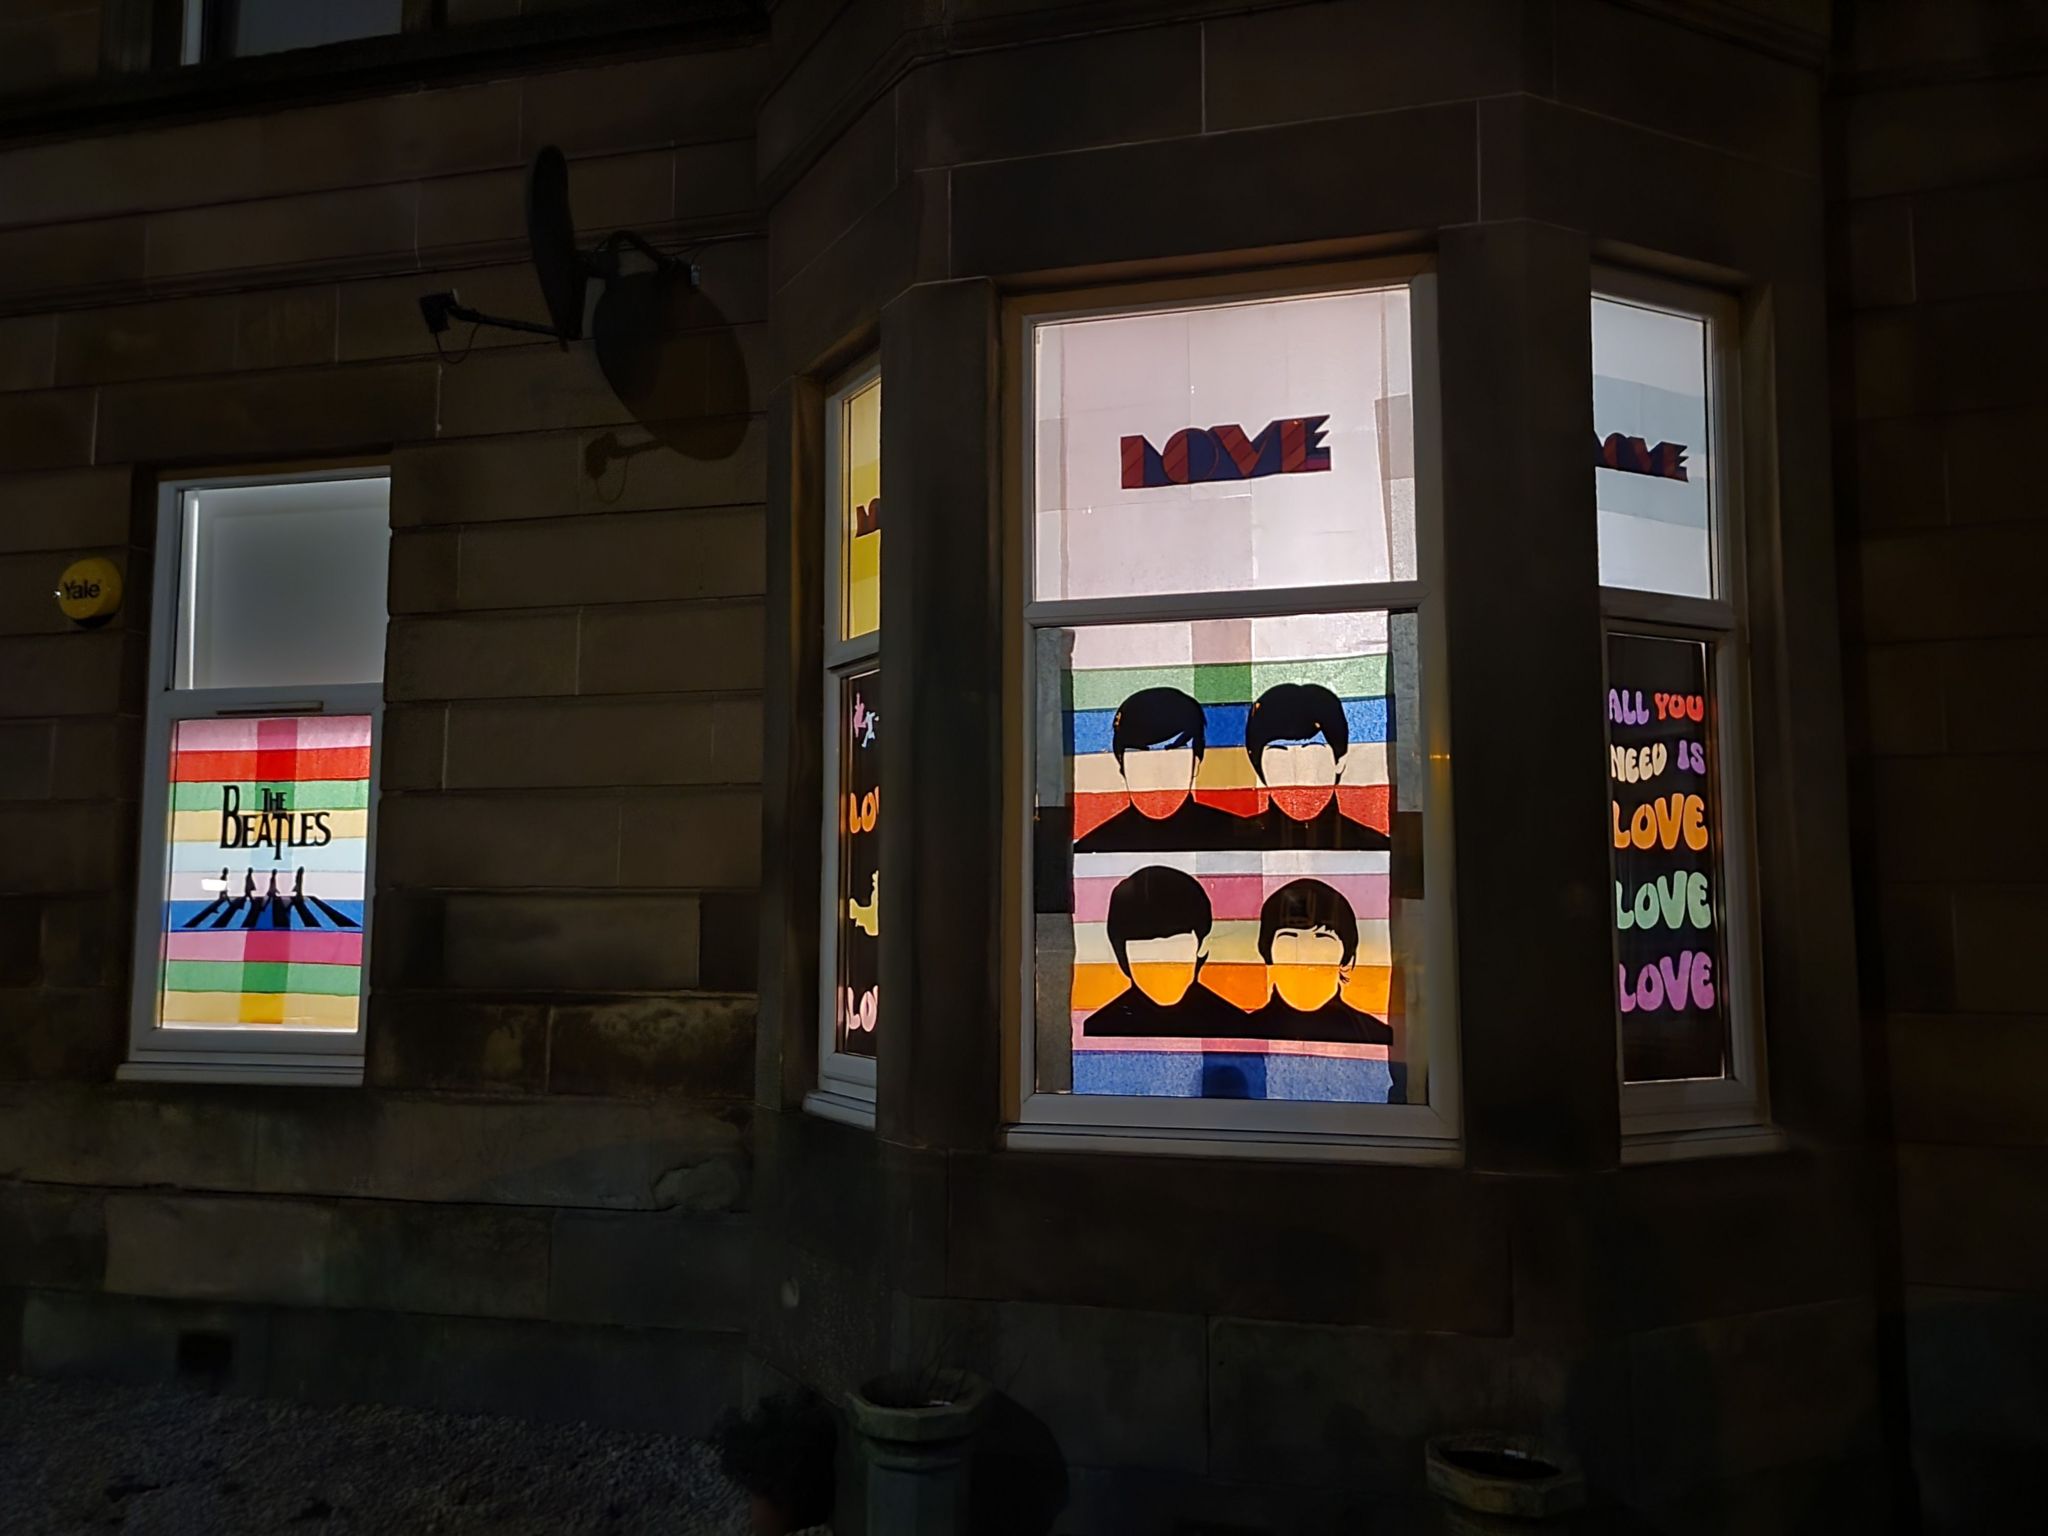 This display was an homage to The Beatles, featuring their silhouettes and lyrics